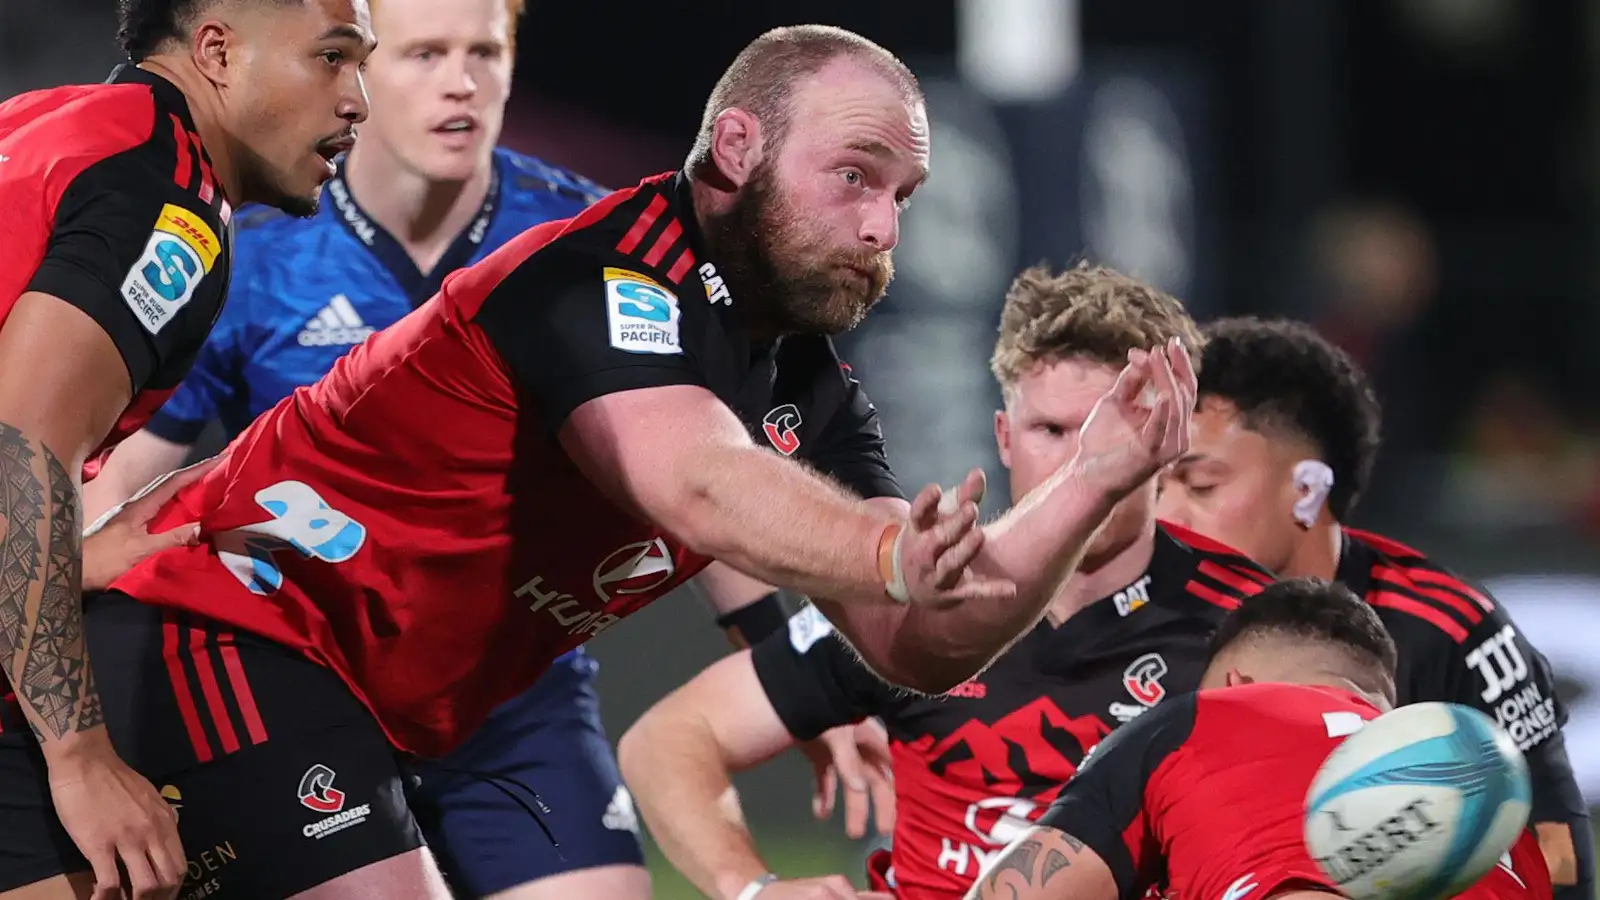 Crusaders prop Oli Jager passing in Super Rugby Pacific clash with the Blues.